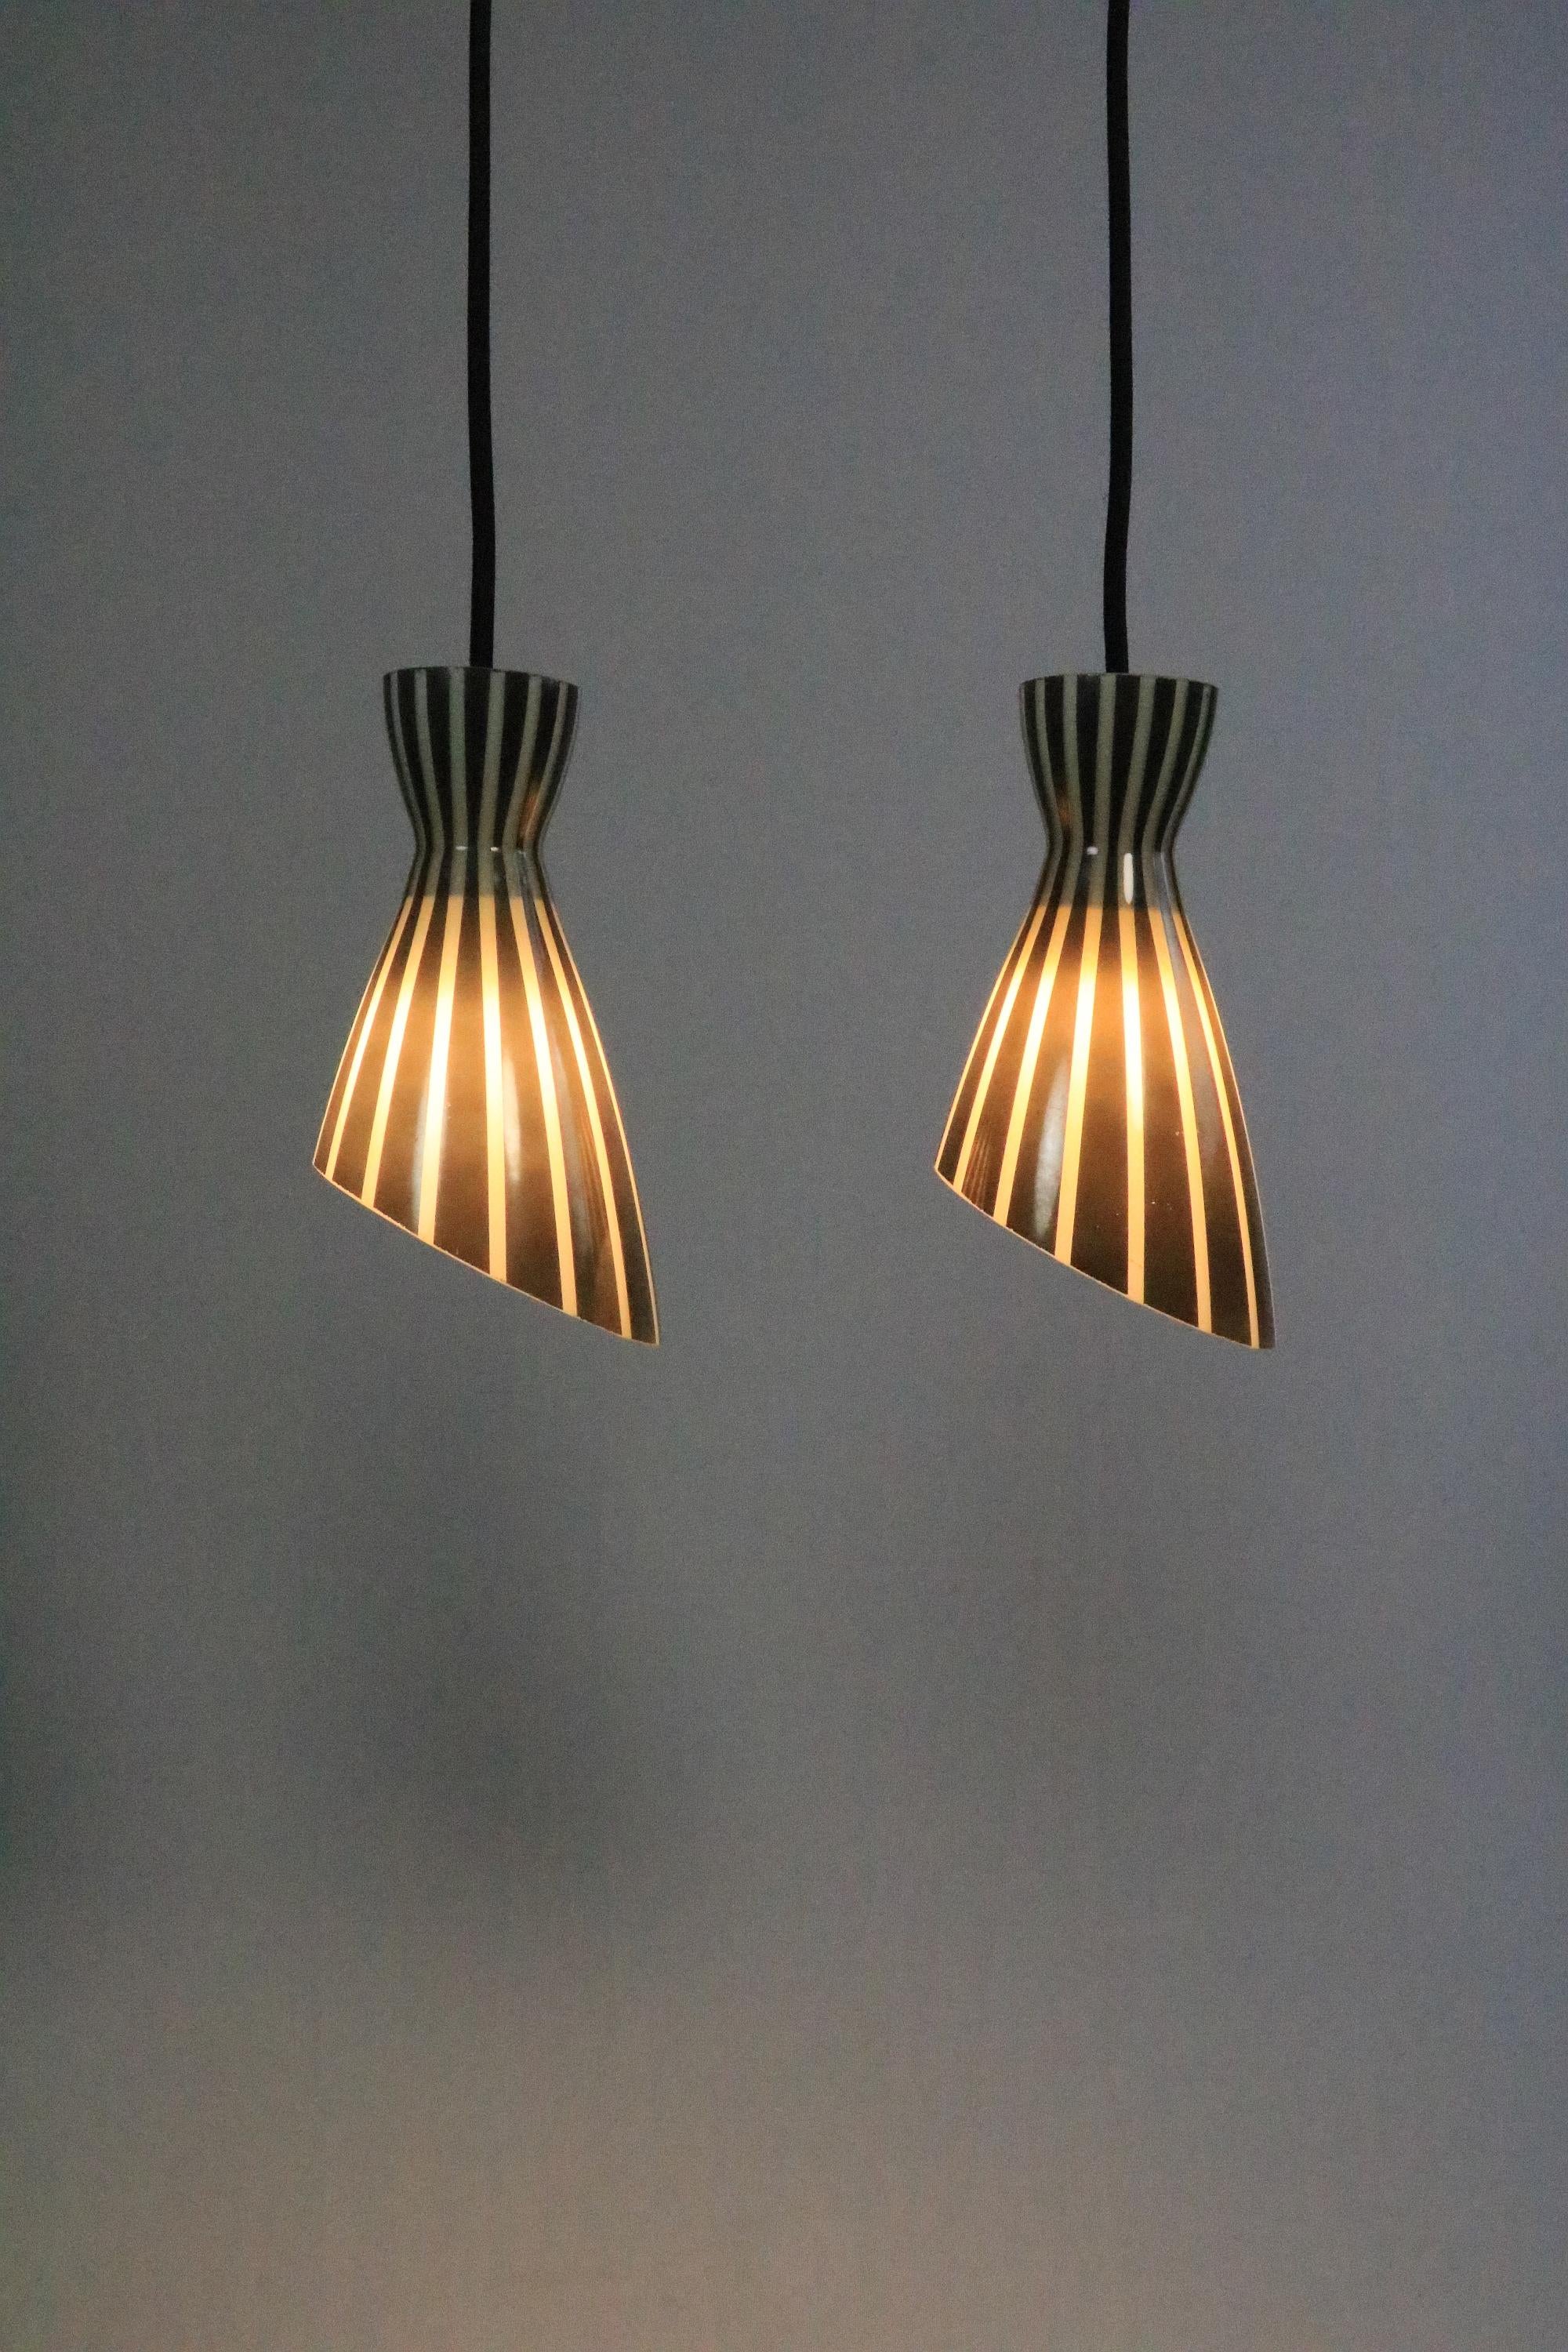 Set of 2 Glass Hanging Lamps, Black and White Striped, Original 1950s For Sale 7